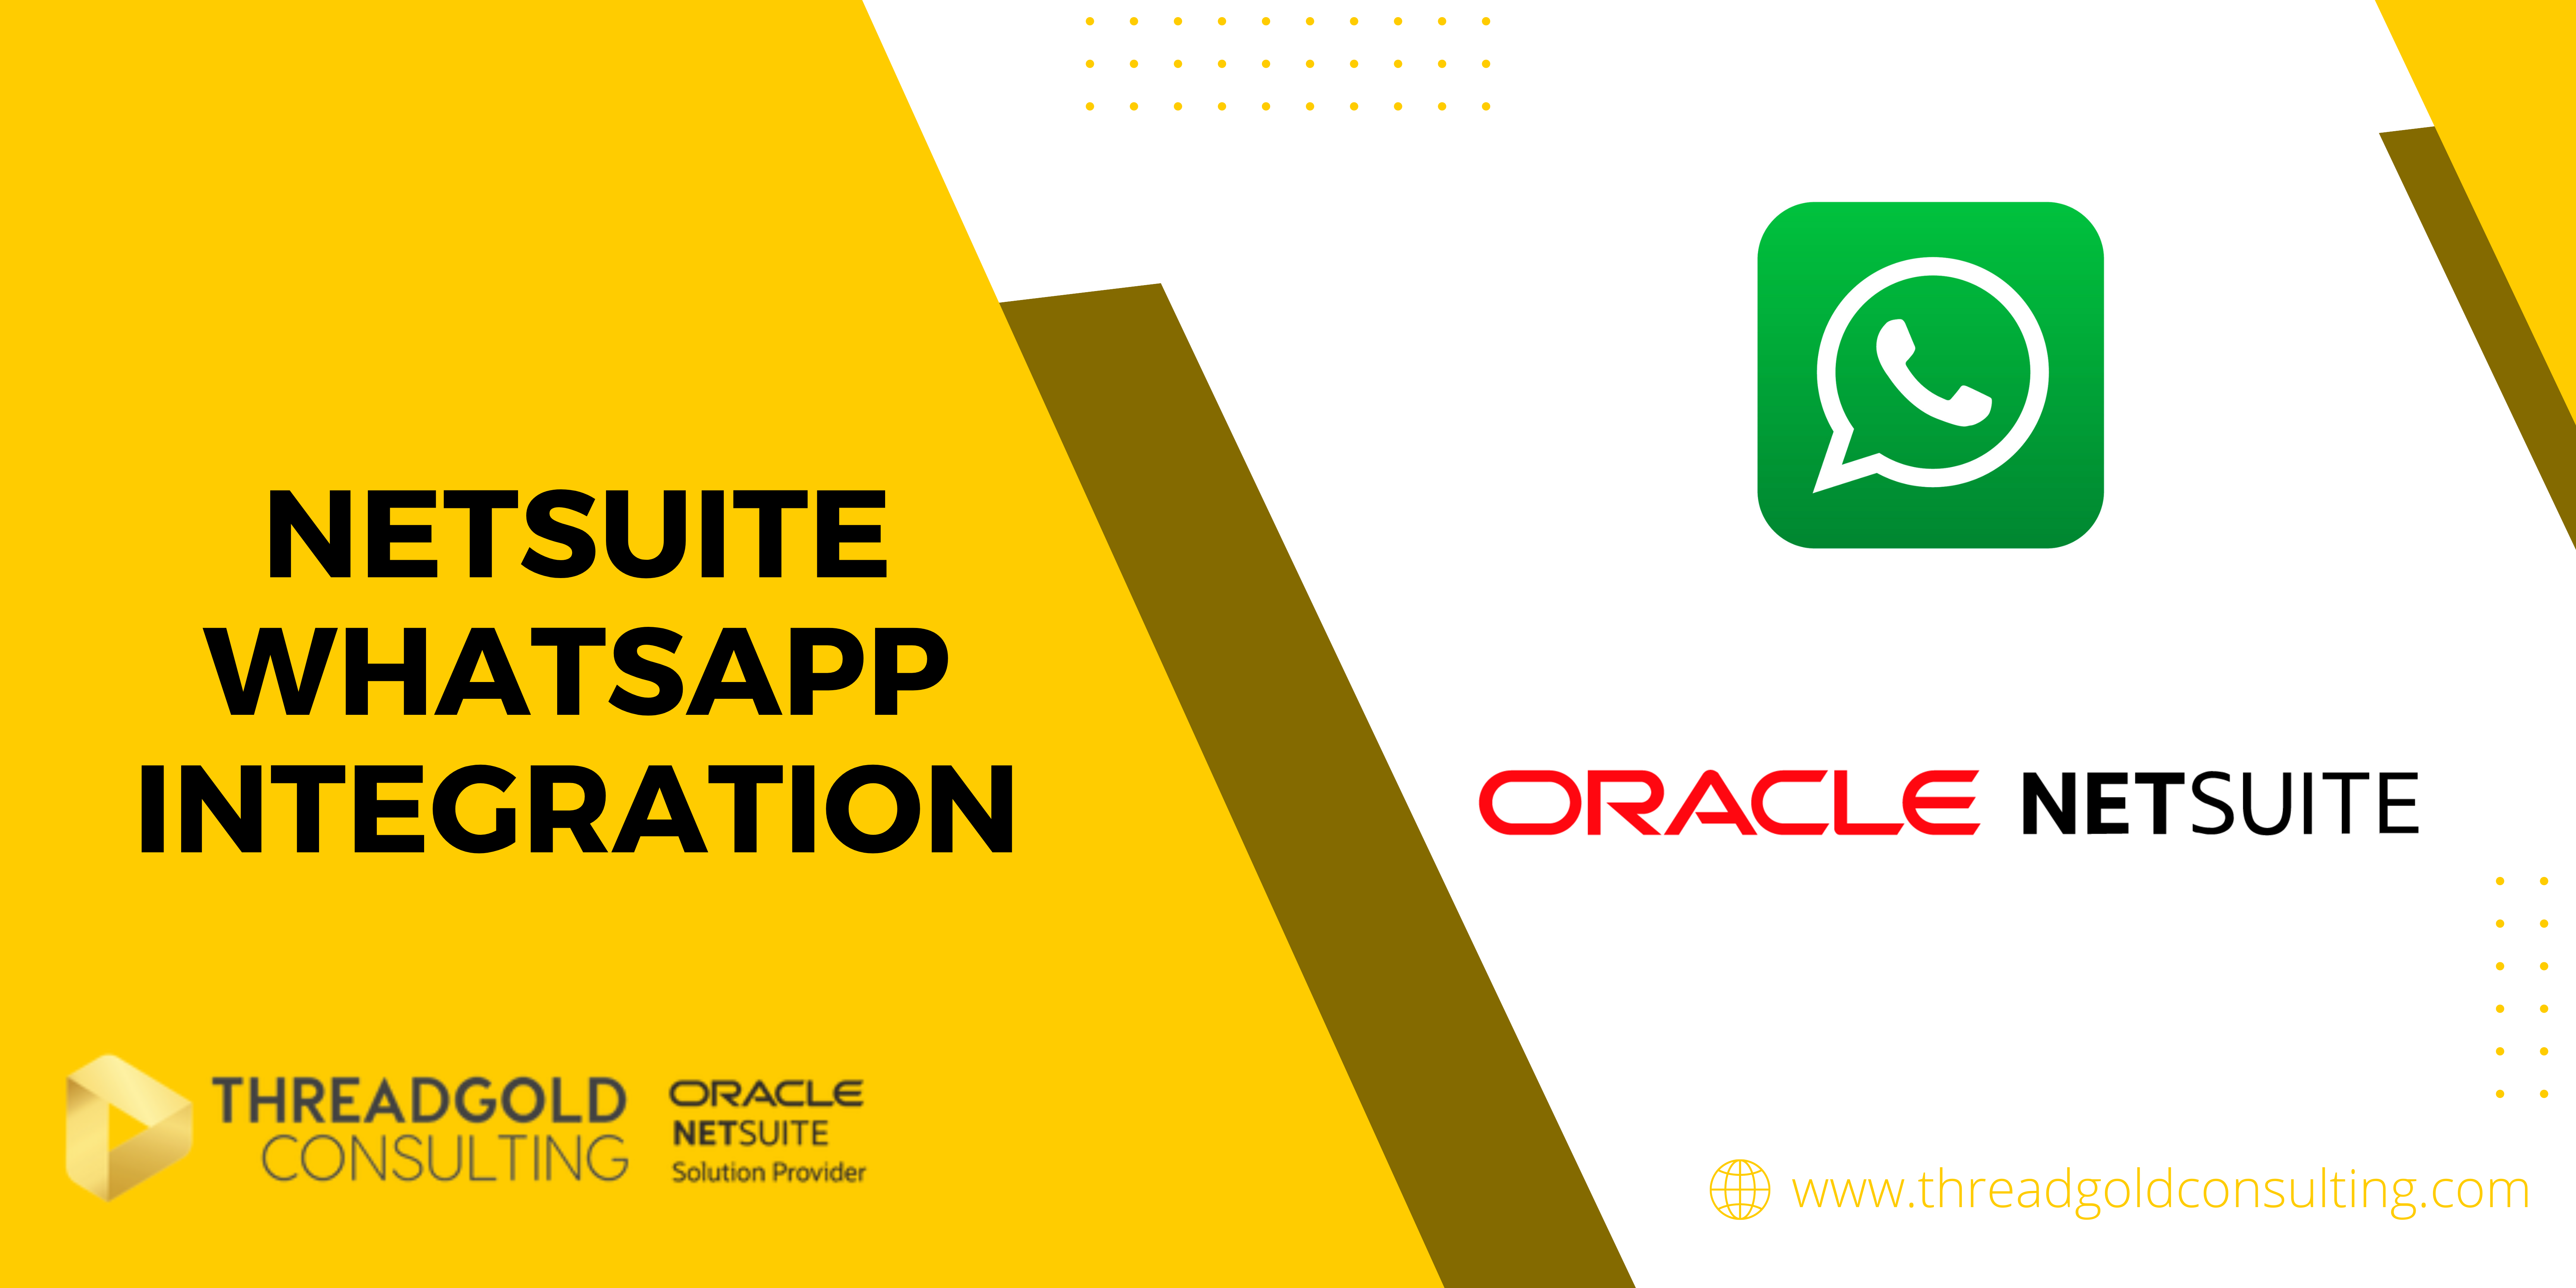 The NetSuite WhatsApp Integration: Where ERP meets Instant Messaging